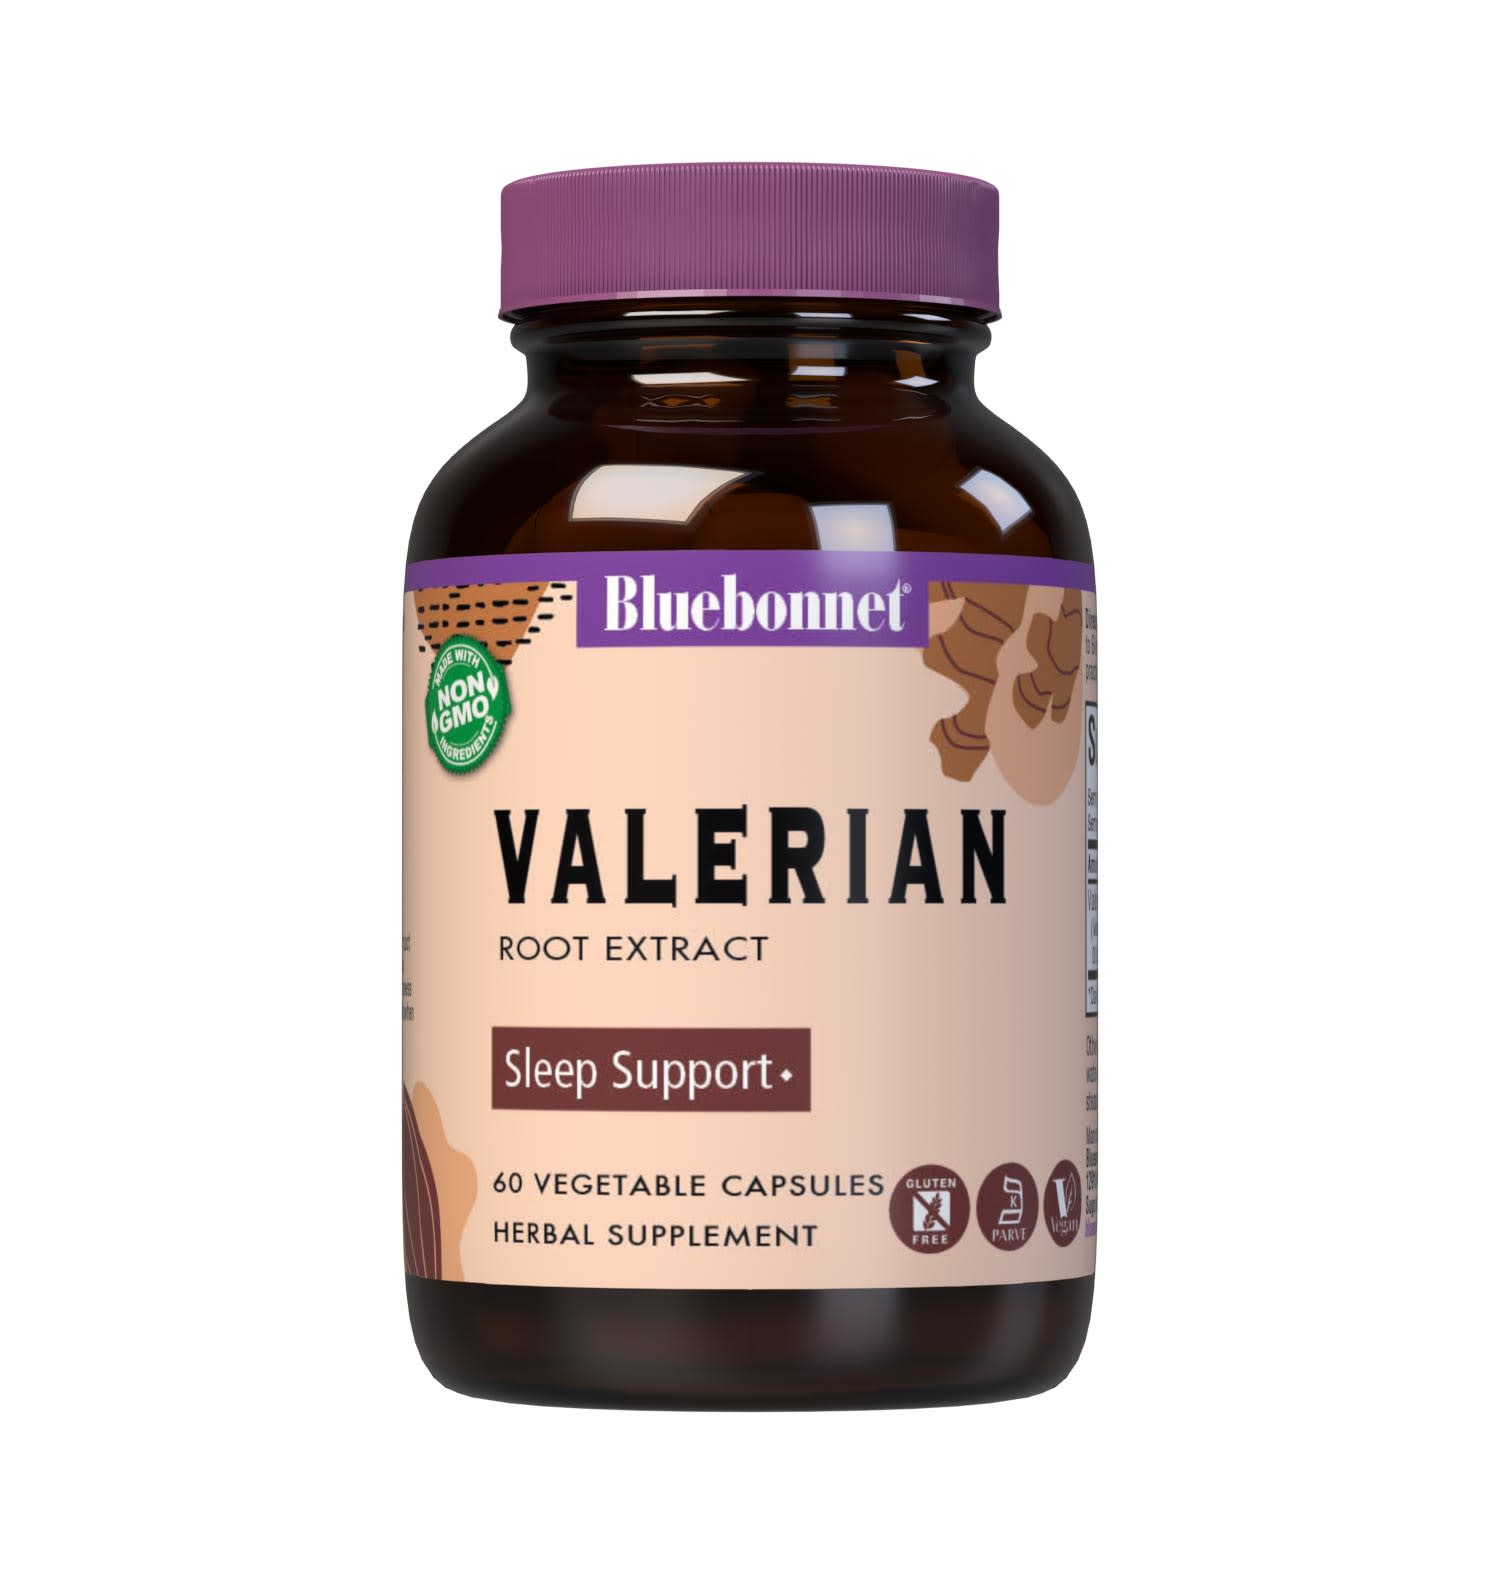 Bluebonnet’s Valerian Root Extract 60 Vegetable Capsules contain a standardized extract of total valerenic acid, the most researched active constituent found in valerian. A clean and gentle water-based extraction method is employed to capture and preserve valerian’s most valuable components. #size_60 count